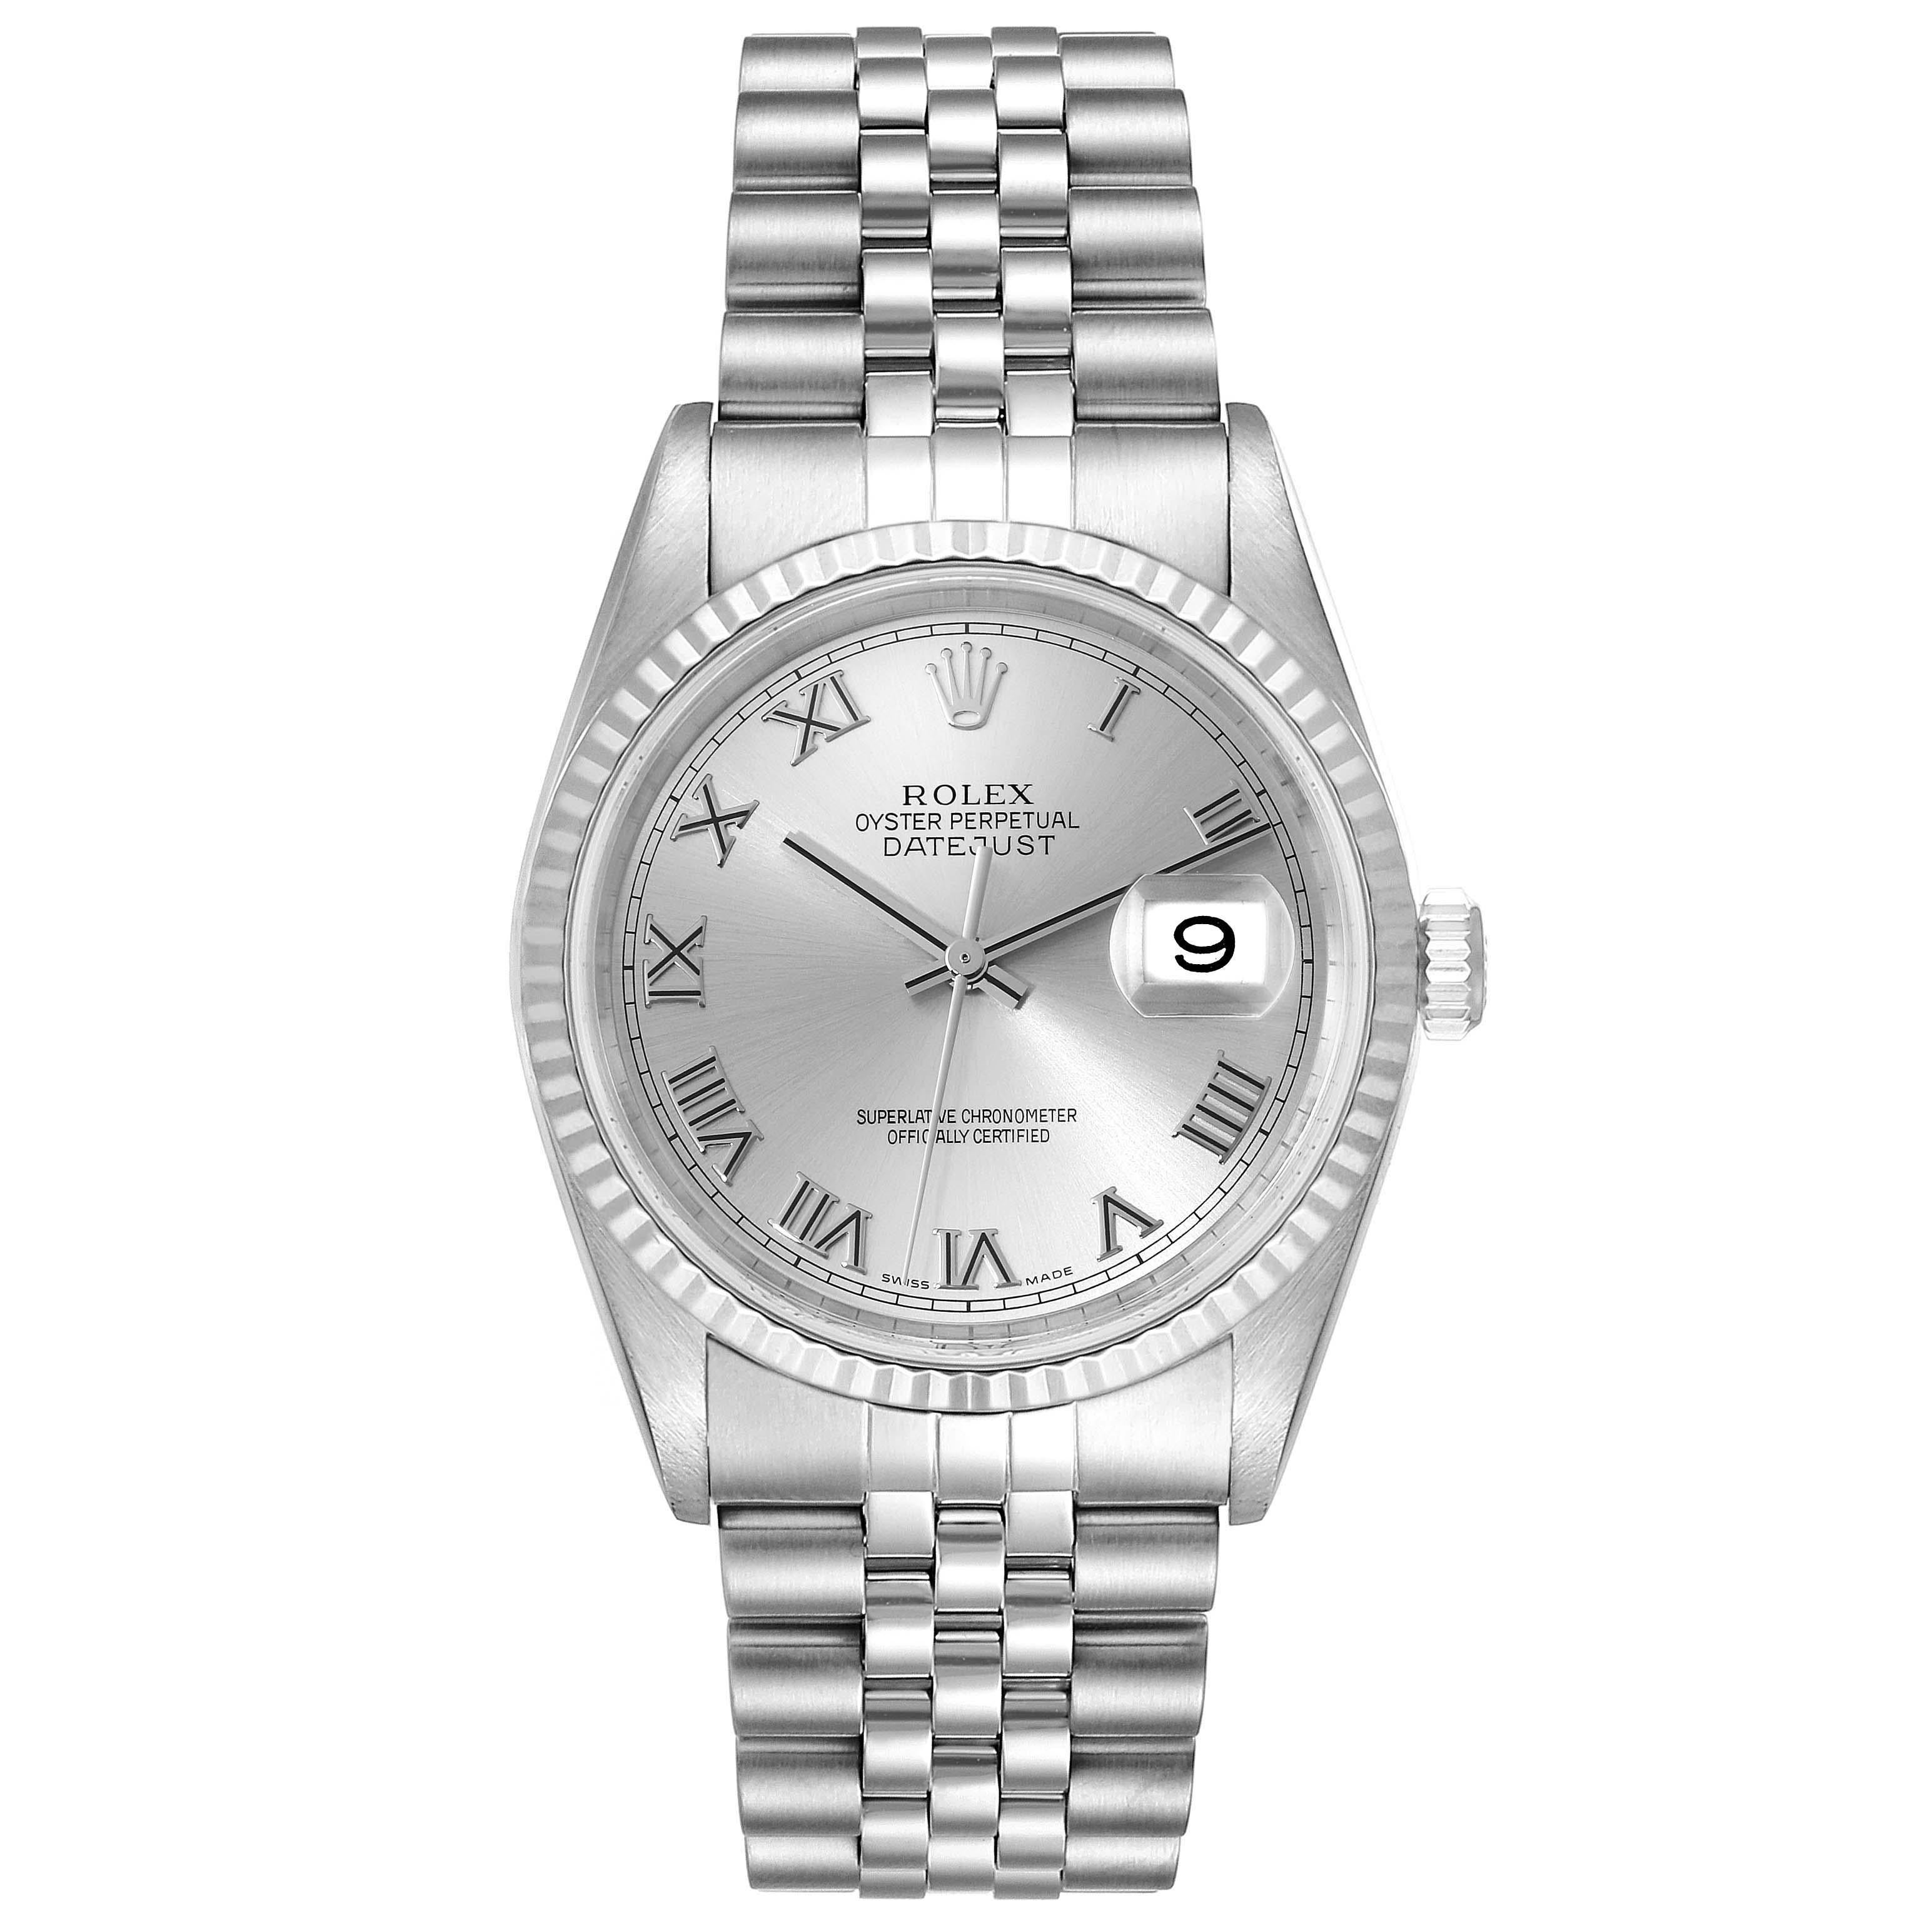 Rolex Datejust Steel White Gold Silver Roman Dial Mens Watch 16234. Officially certified chronometer automatic self-winding movement. Stainless steel oyster case 36 mm in diameter. Rolex logo on the crown. 18k white gold fluted bezel. Scratch